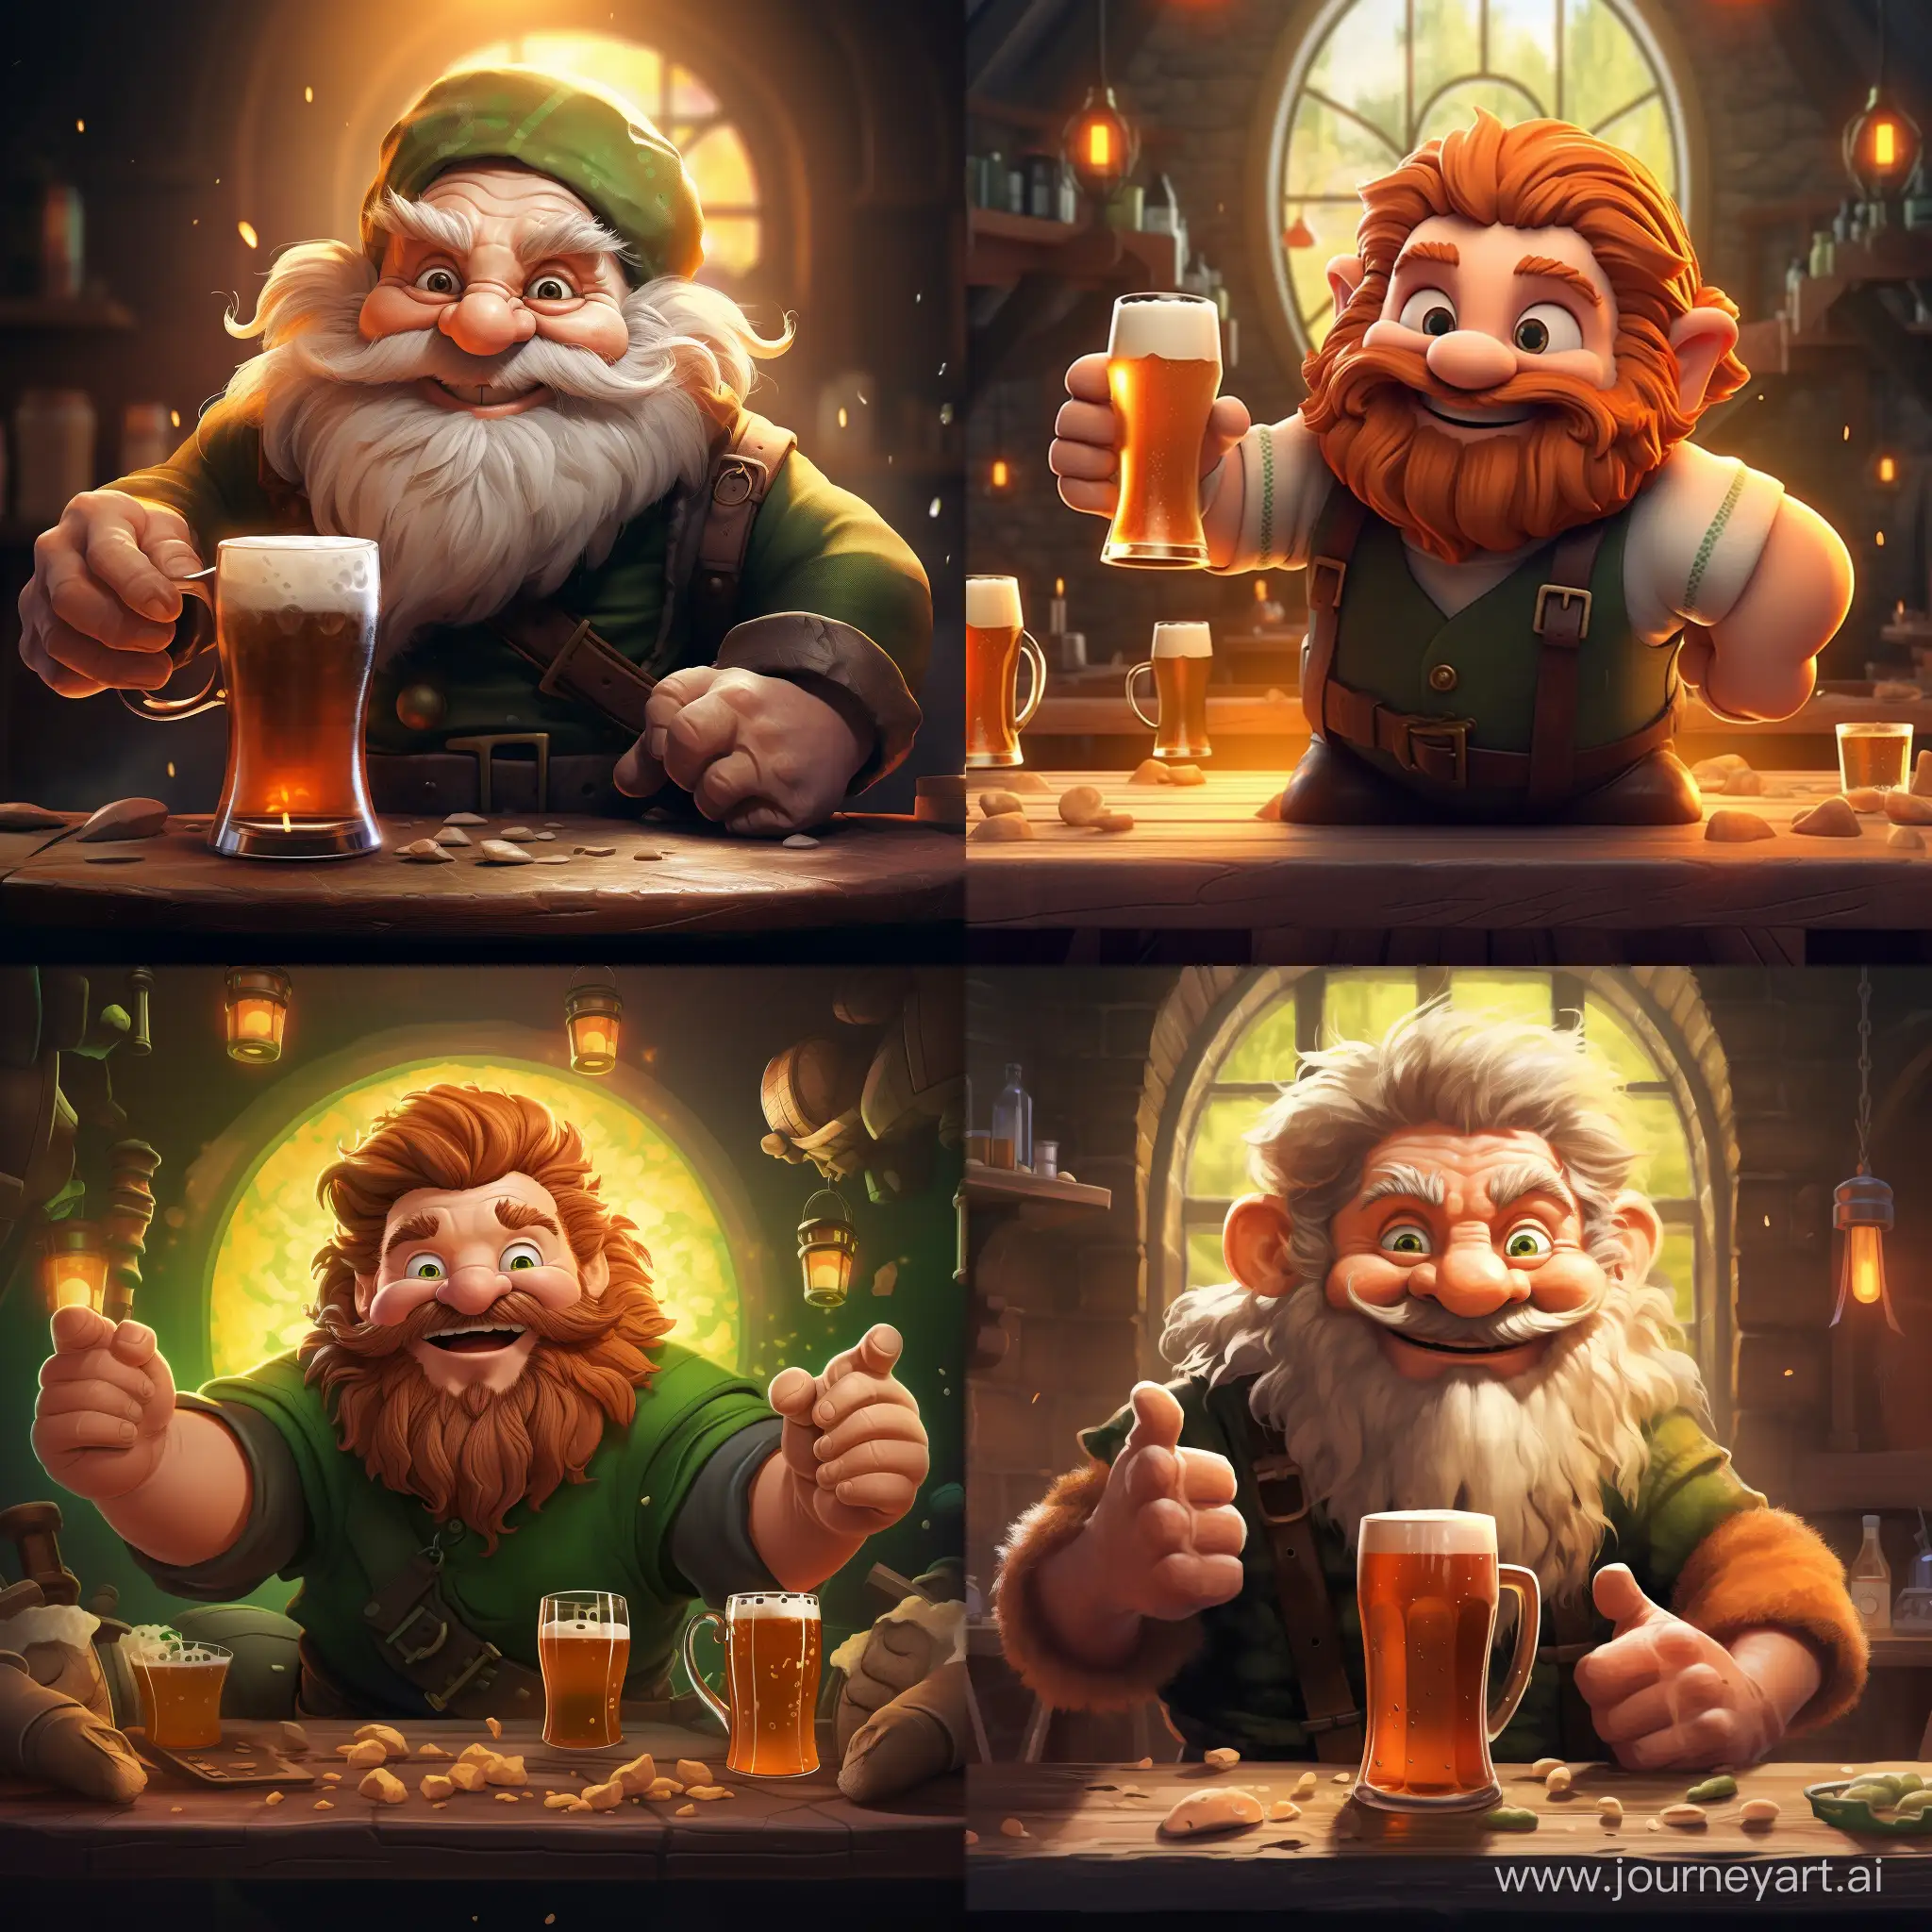 create a happy small Irish dworf who loves beer and is very happy on st Patrick day. be creative where the setting is set